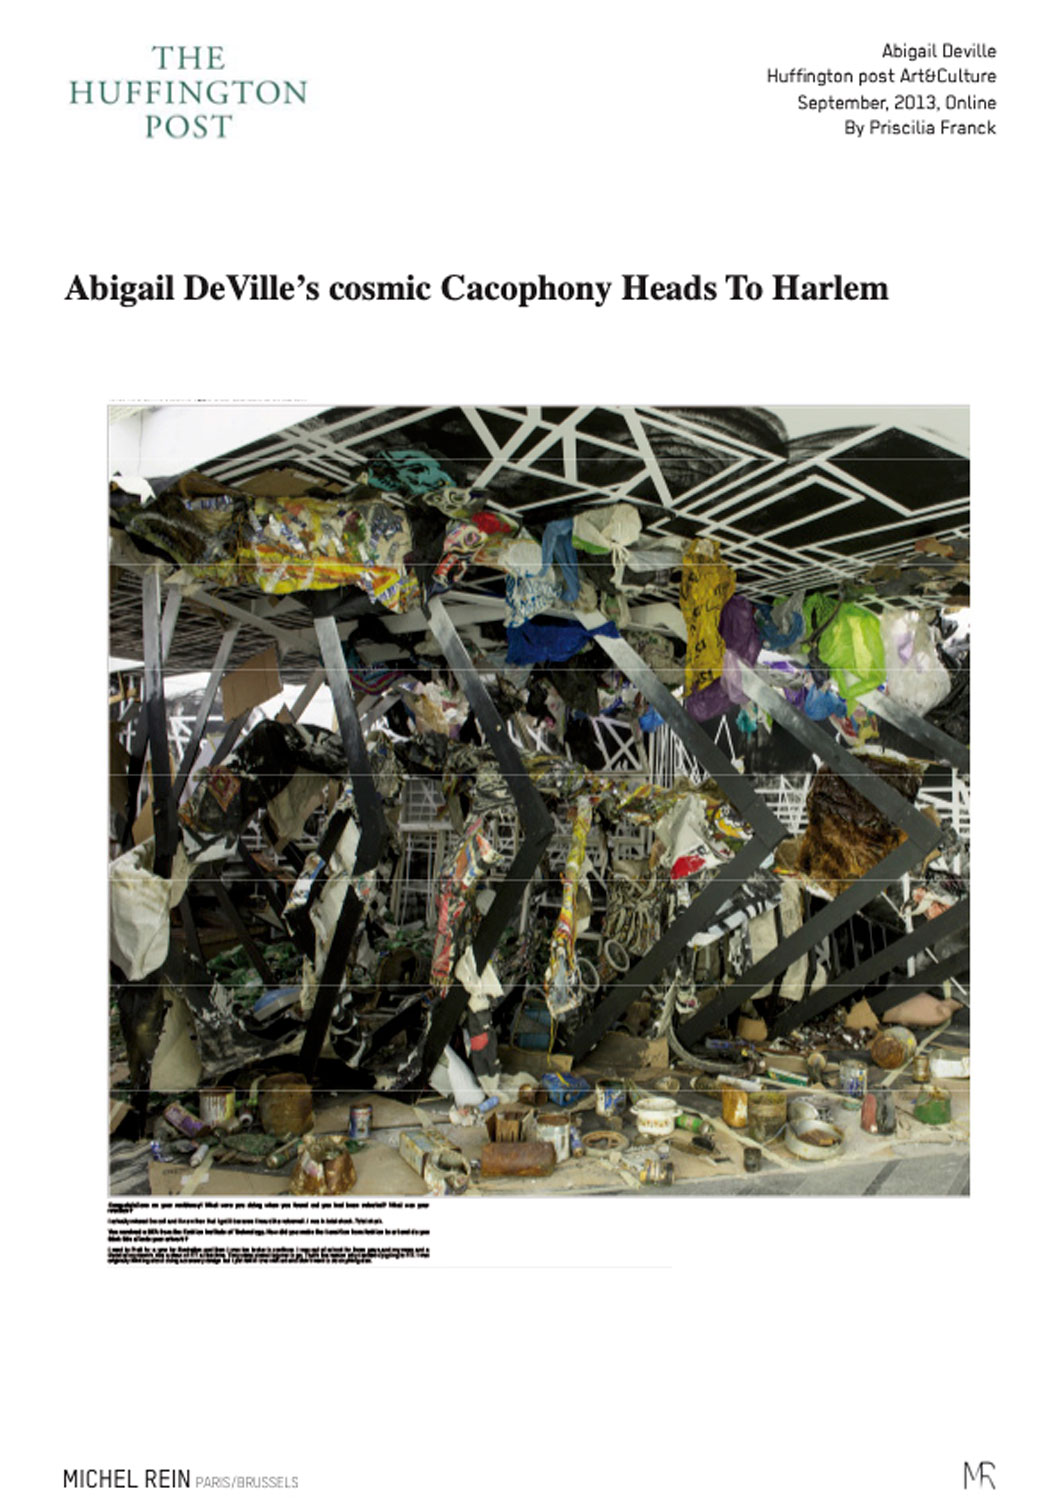 Abigail DeVille?s cosmic Cacophony Heads To Harlem - The Huffington Post